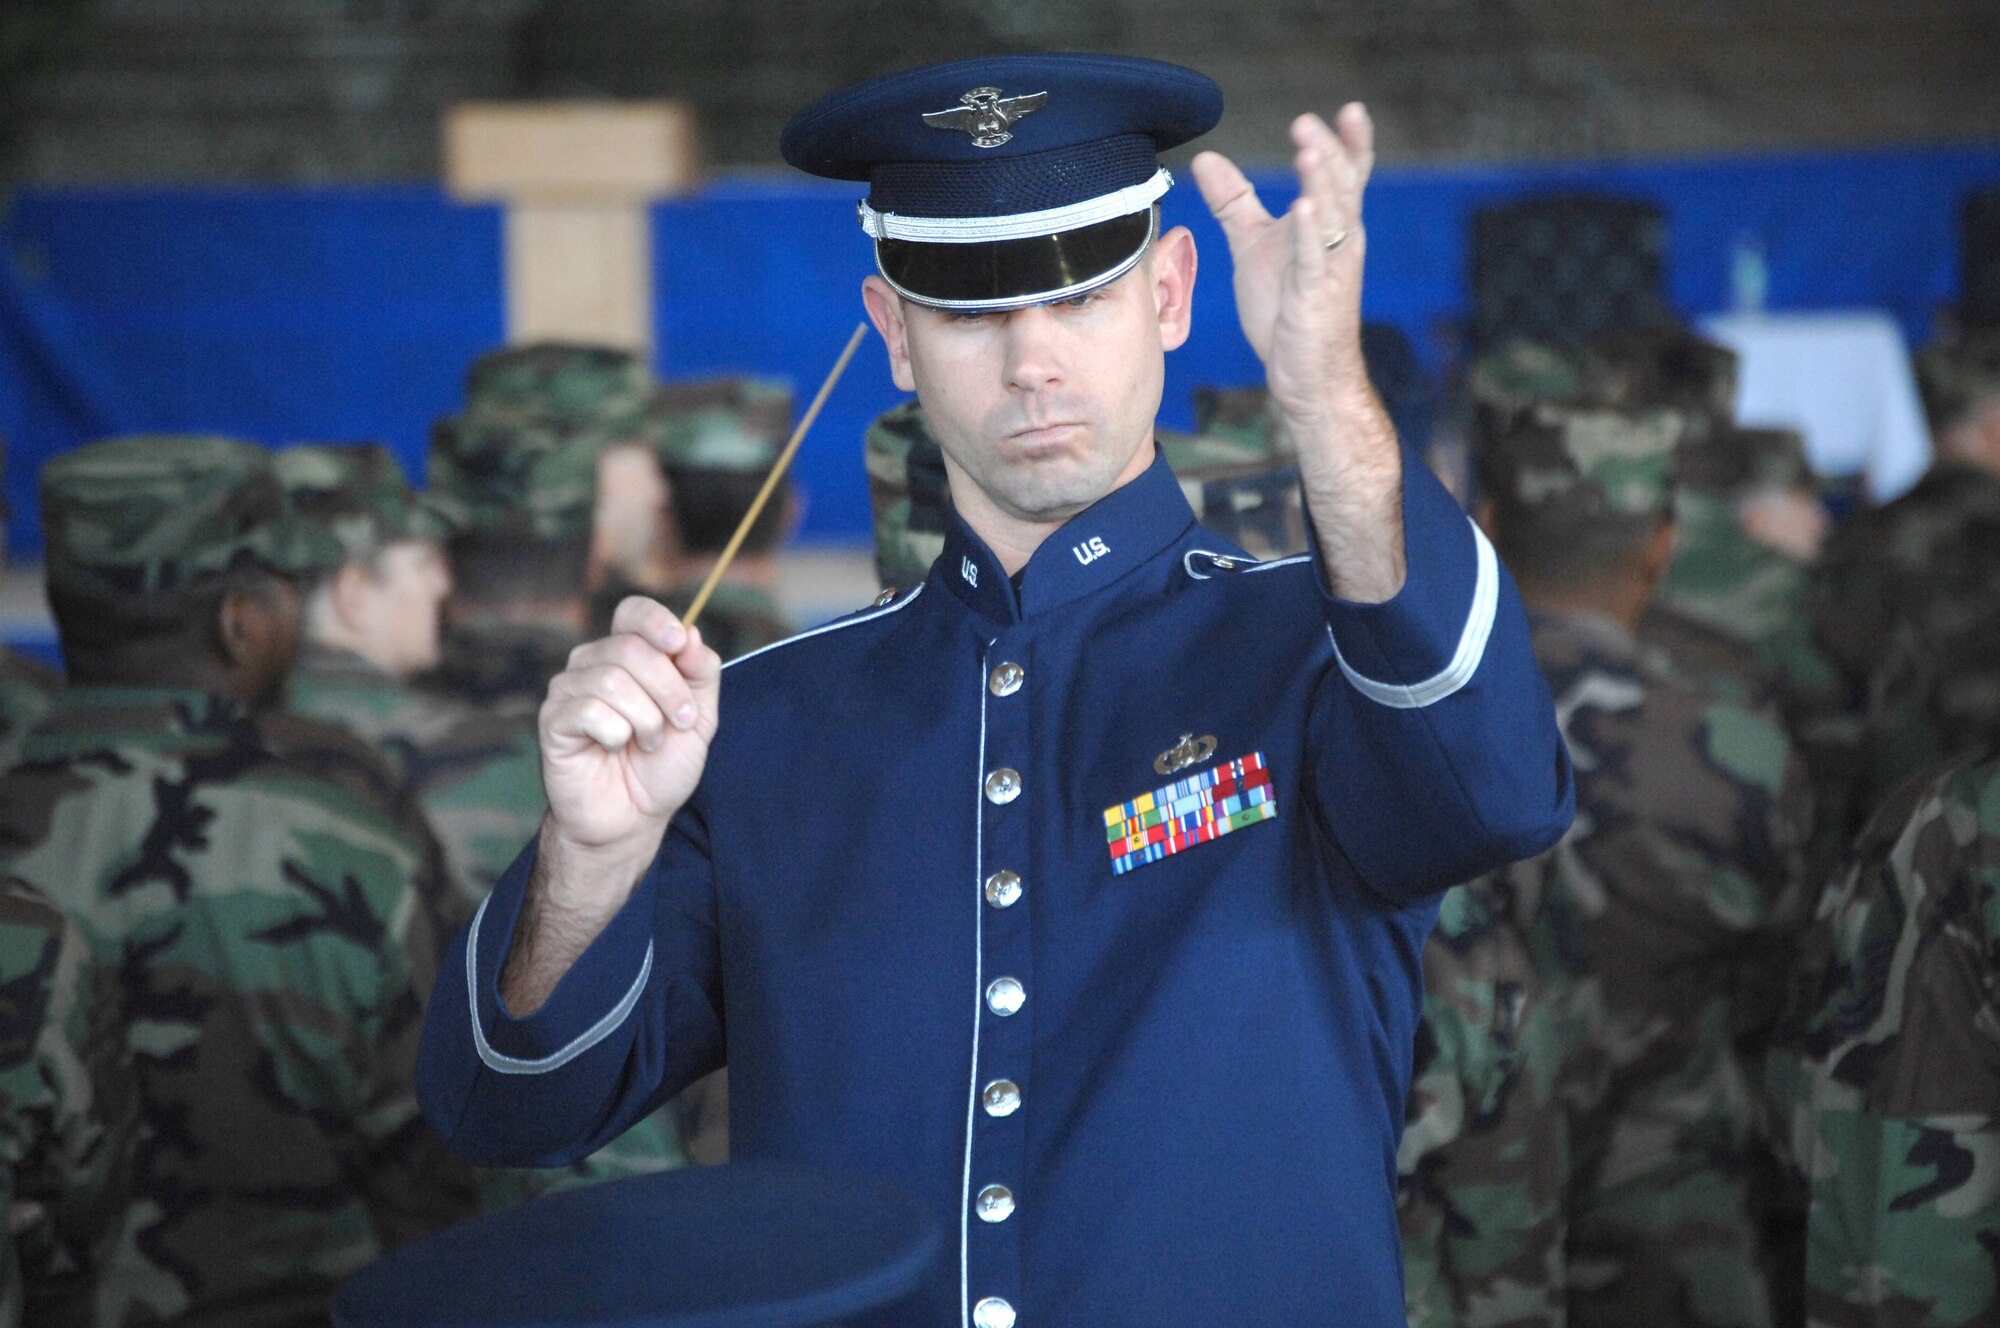 Tech. Sgt. Aaron Miles, Band of the U.S. Air Force Reserve, leads the band in song prior to the Air Force Special Operations Command change of command ceremony Nov. 27 at Hurlburt Field, Fla. (U.S. Air Force photo/Senior Airman Stephanie Jacobs)